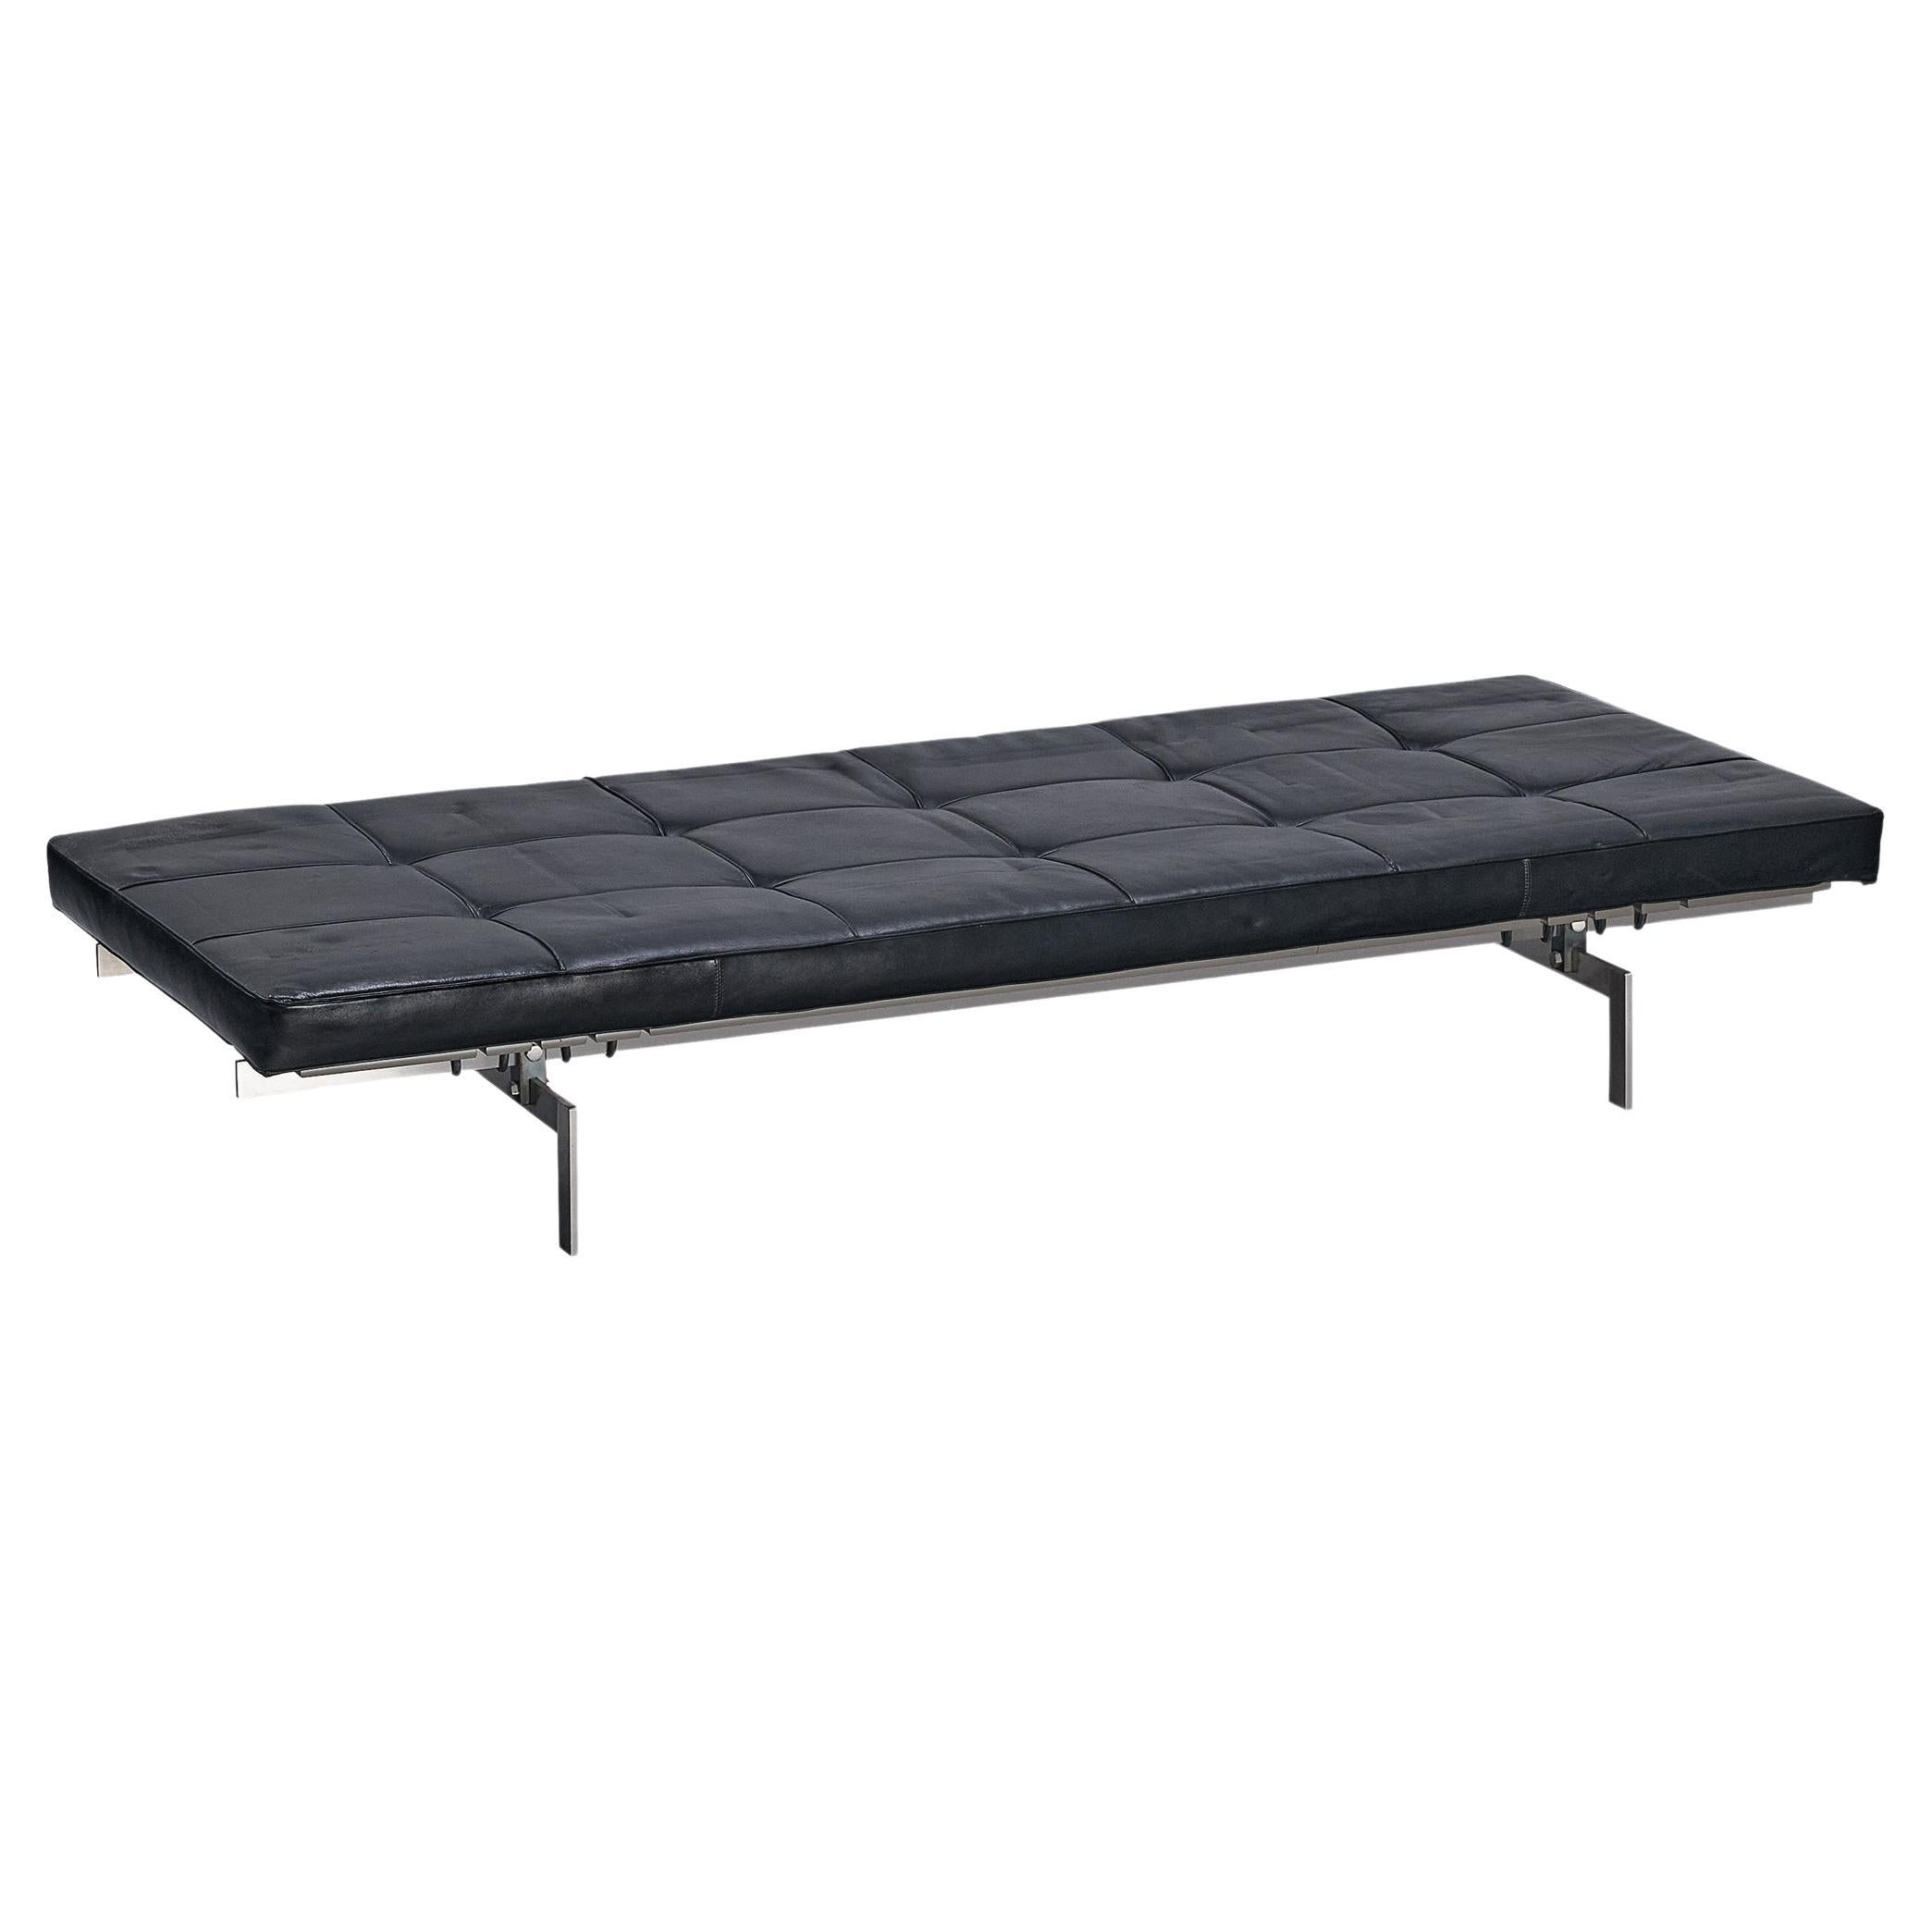 Poul Kjærholm for E. Kold Christensen 'PK80' Daybed in Leather and Steel 